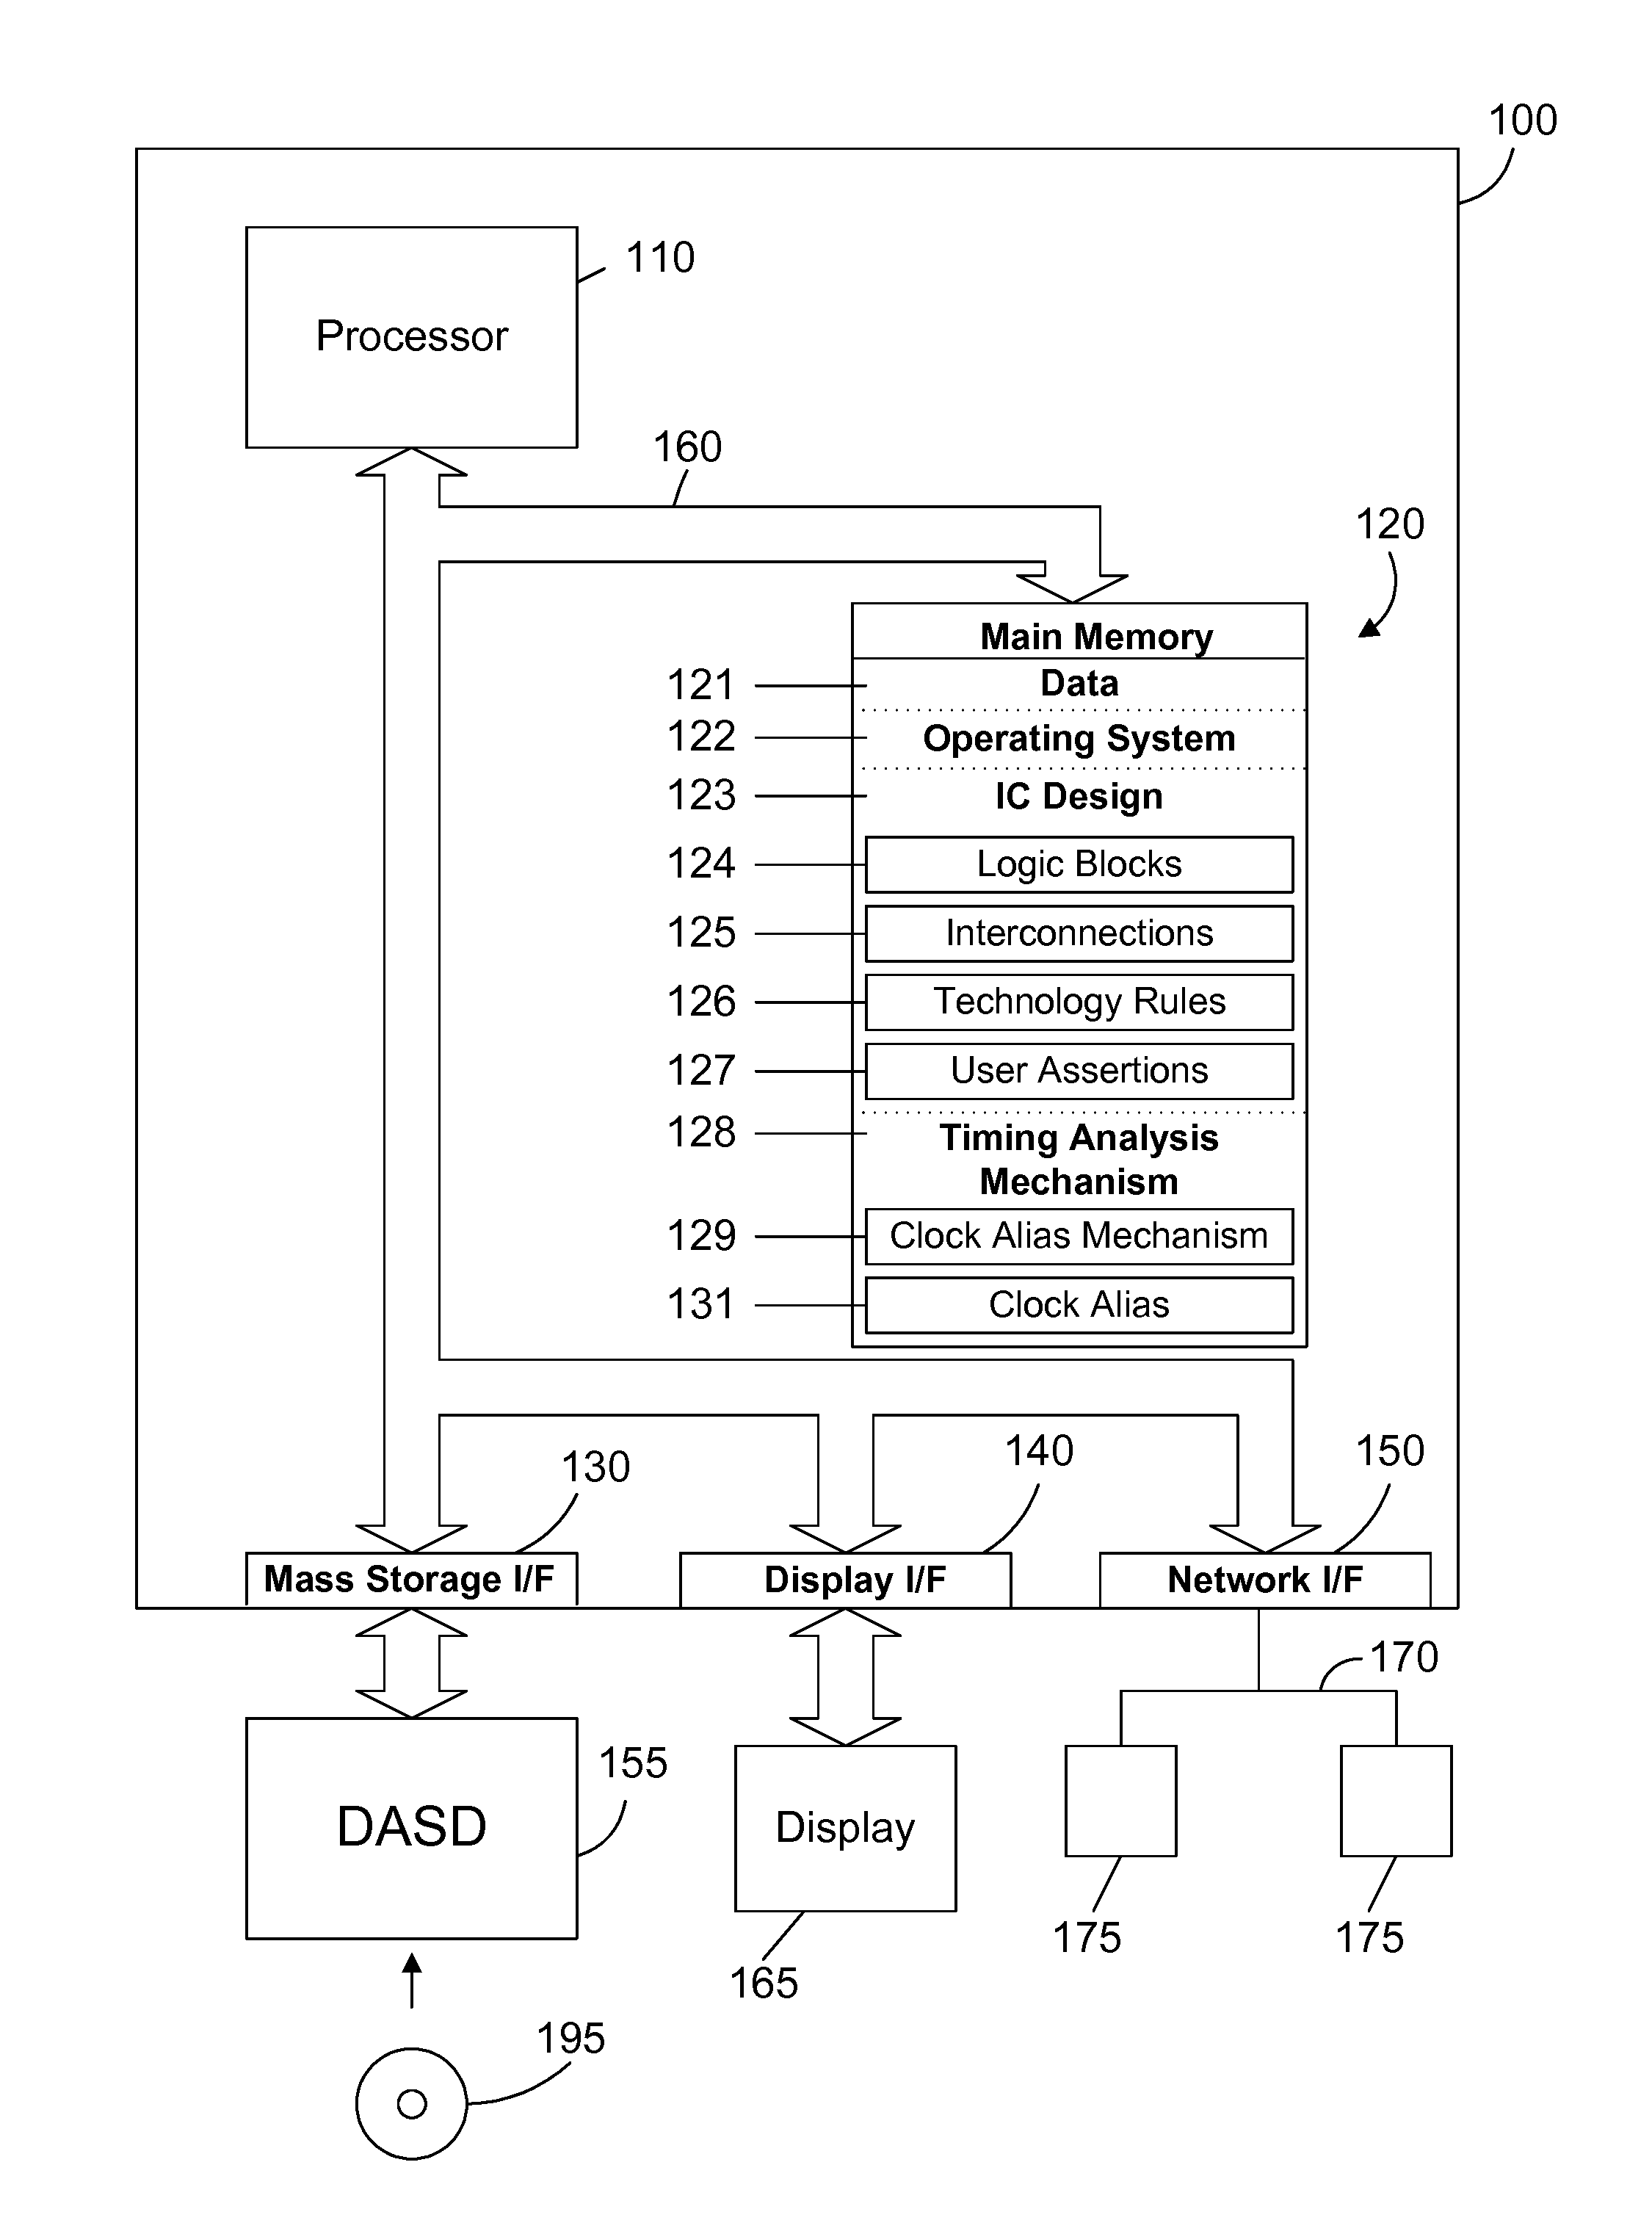 Clock alias for timing analysis of an integrated circuit design